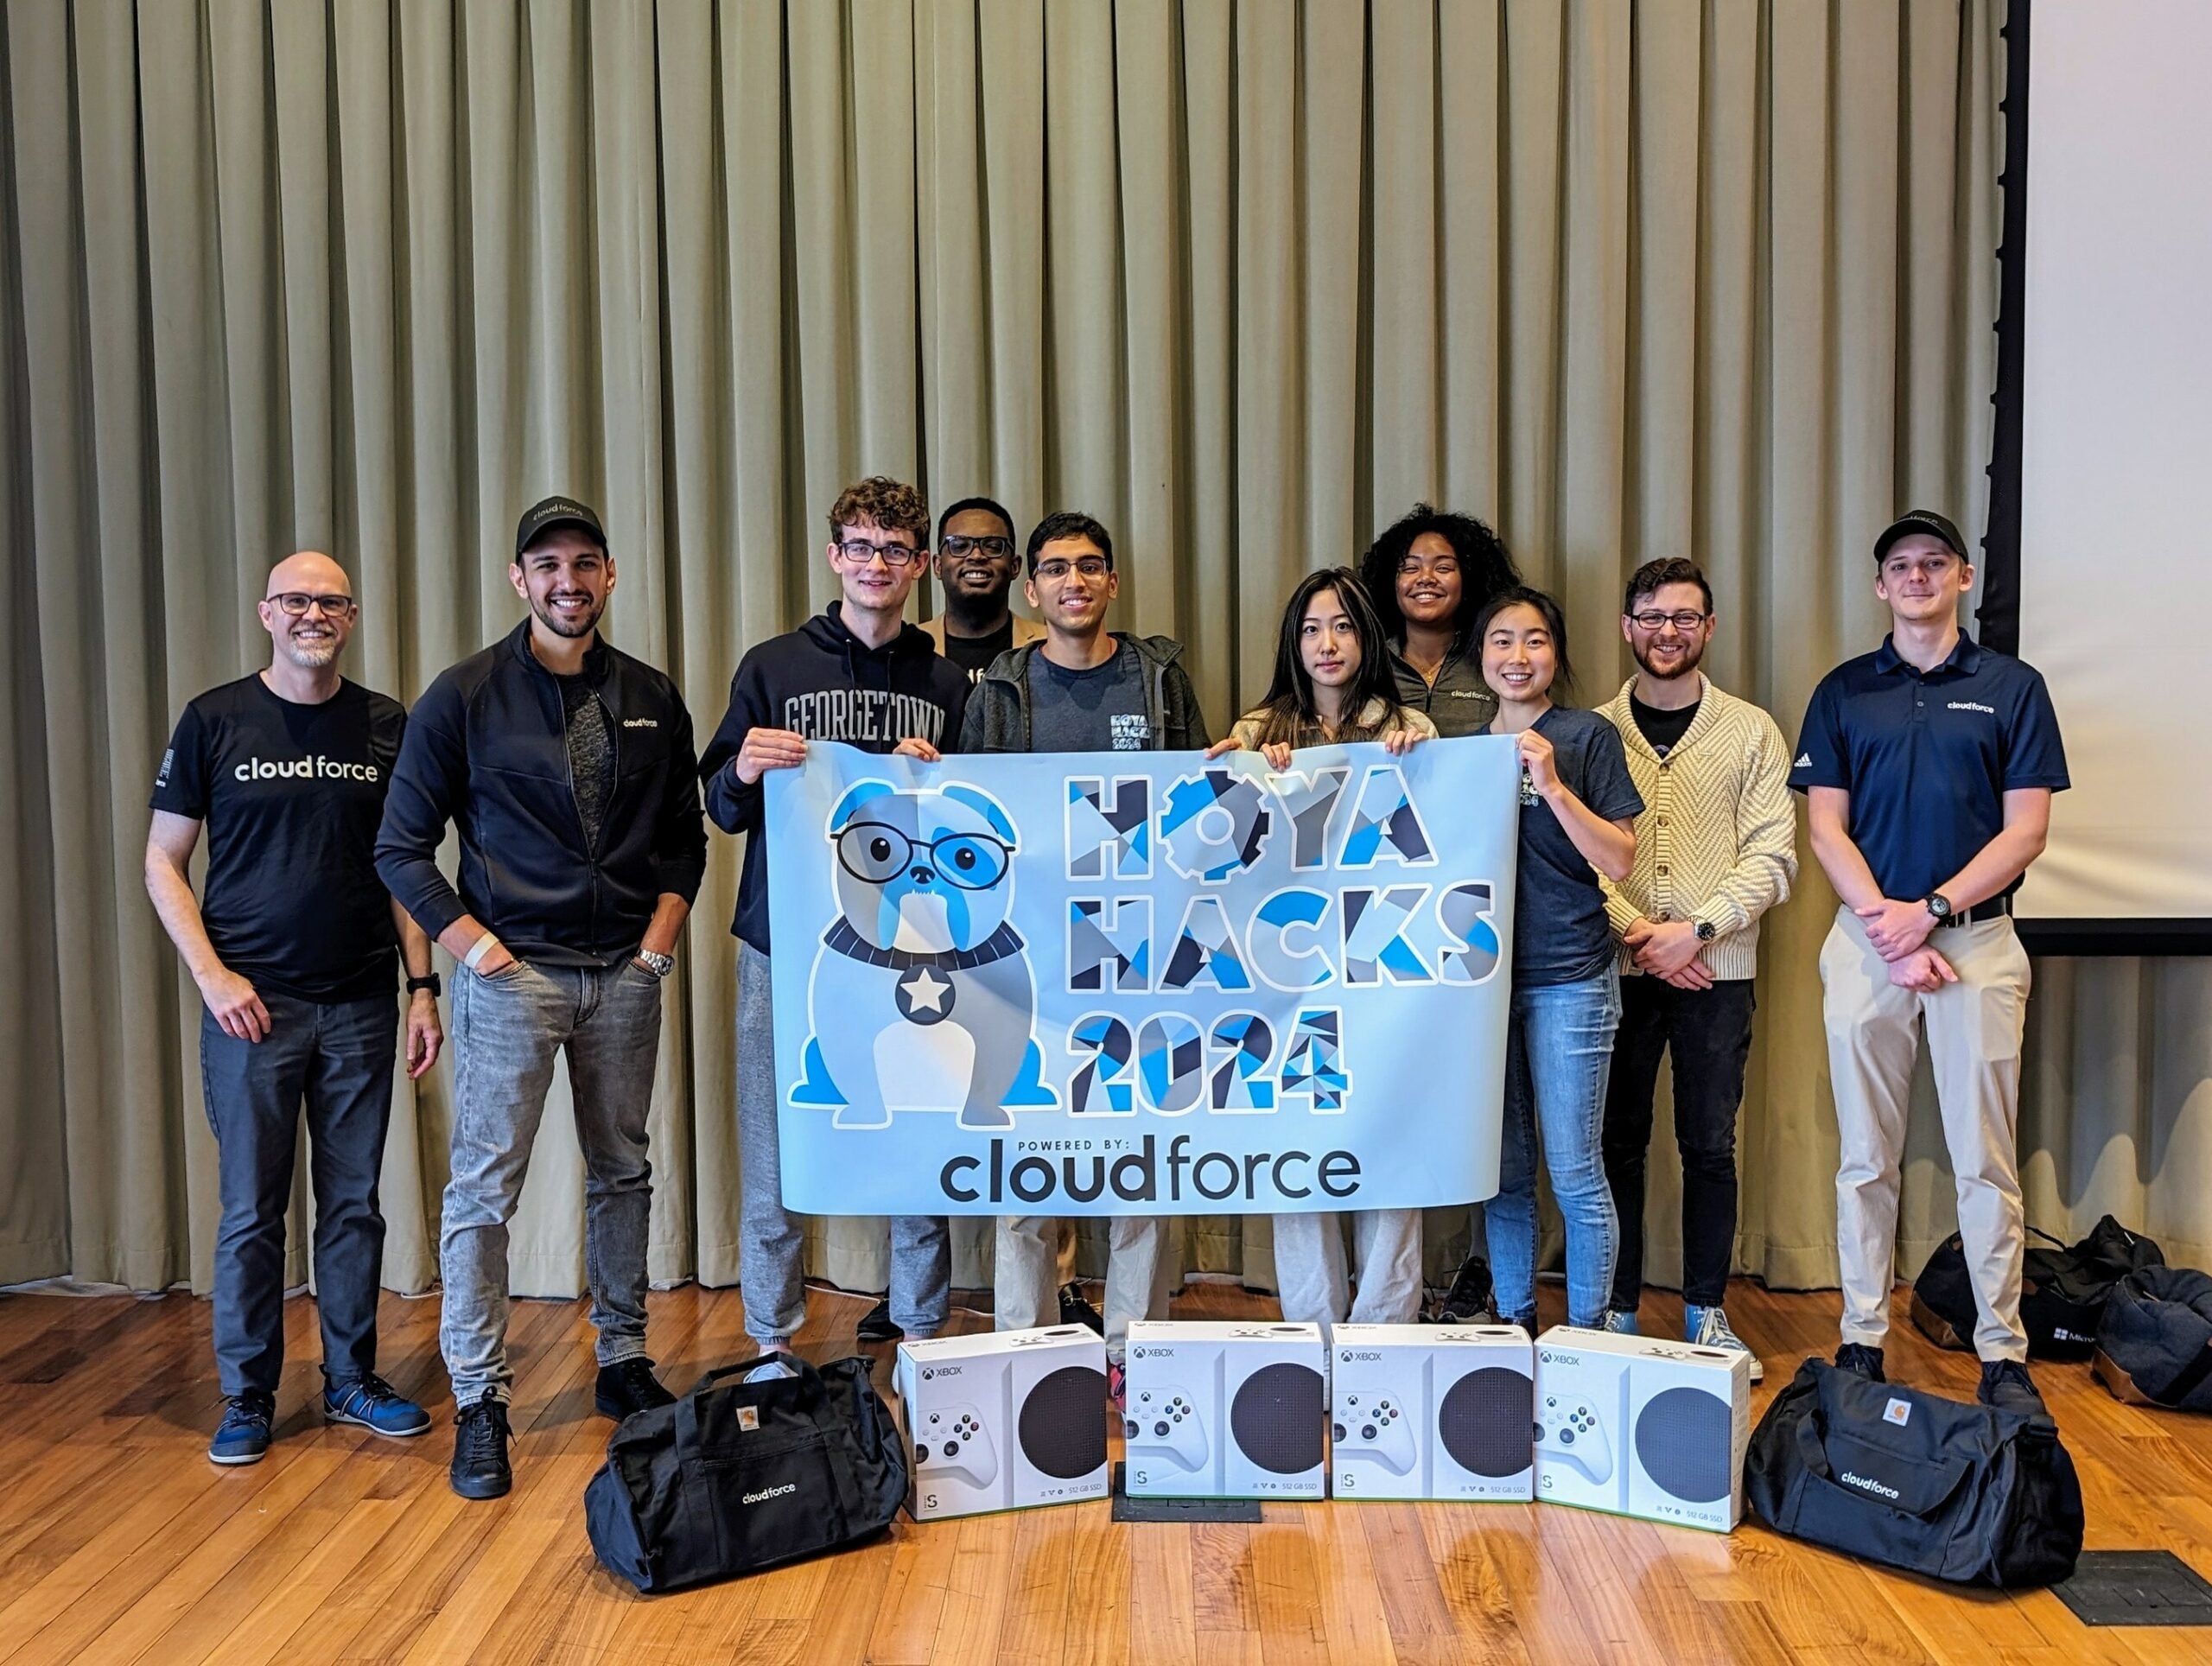 Georgetown students Annika Lin, Maggie Shen, Reed Uhlik and Sameer Tirumala were awarded the Cloudforce-Microsoft AI Track prize